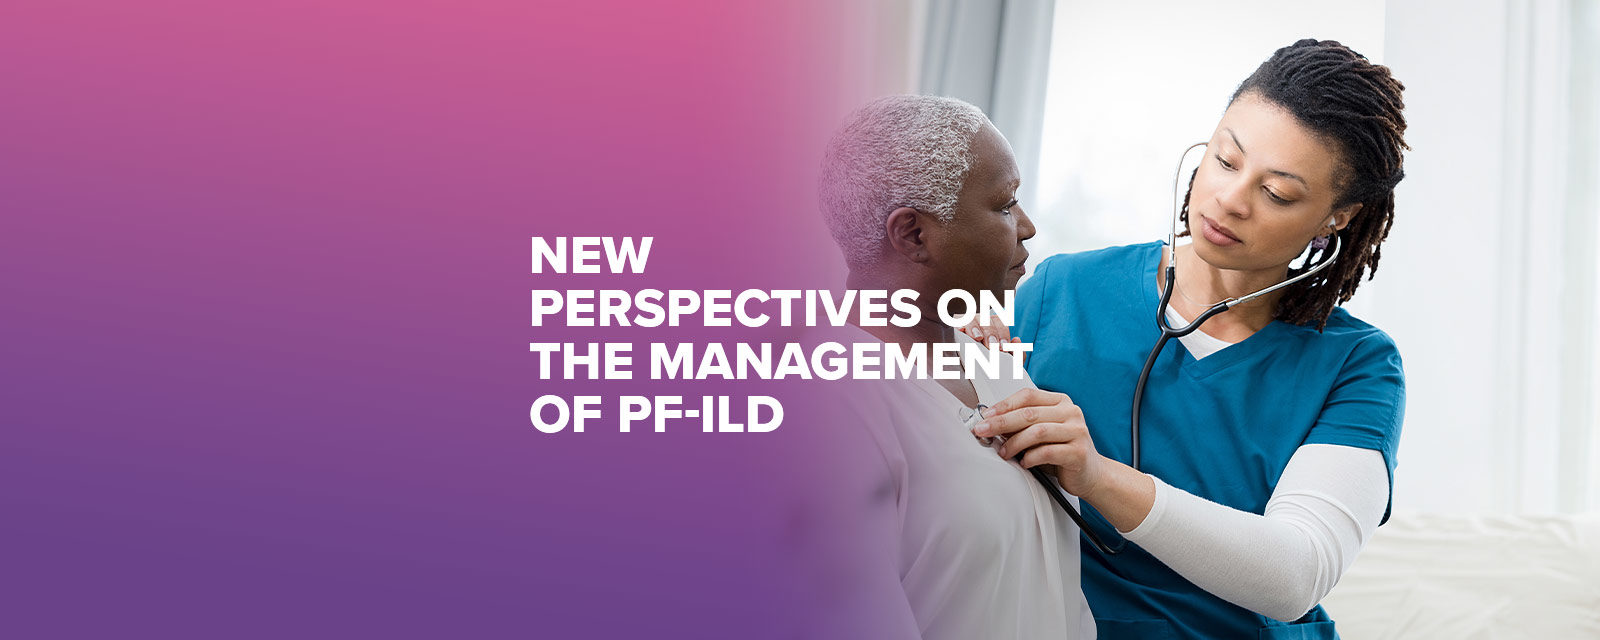 New Perspectives on the Management of PF-ILD